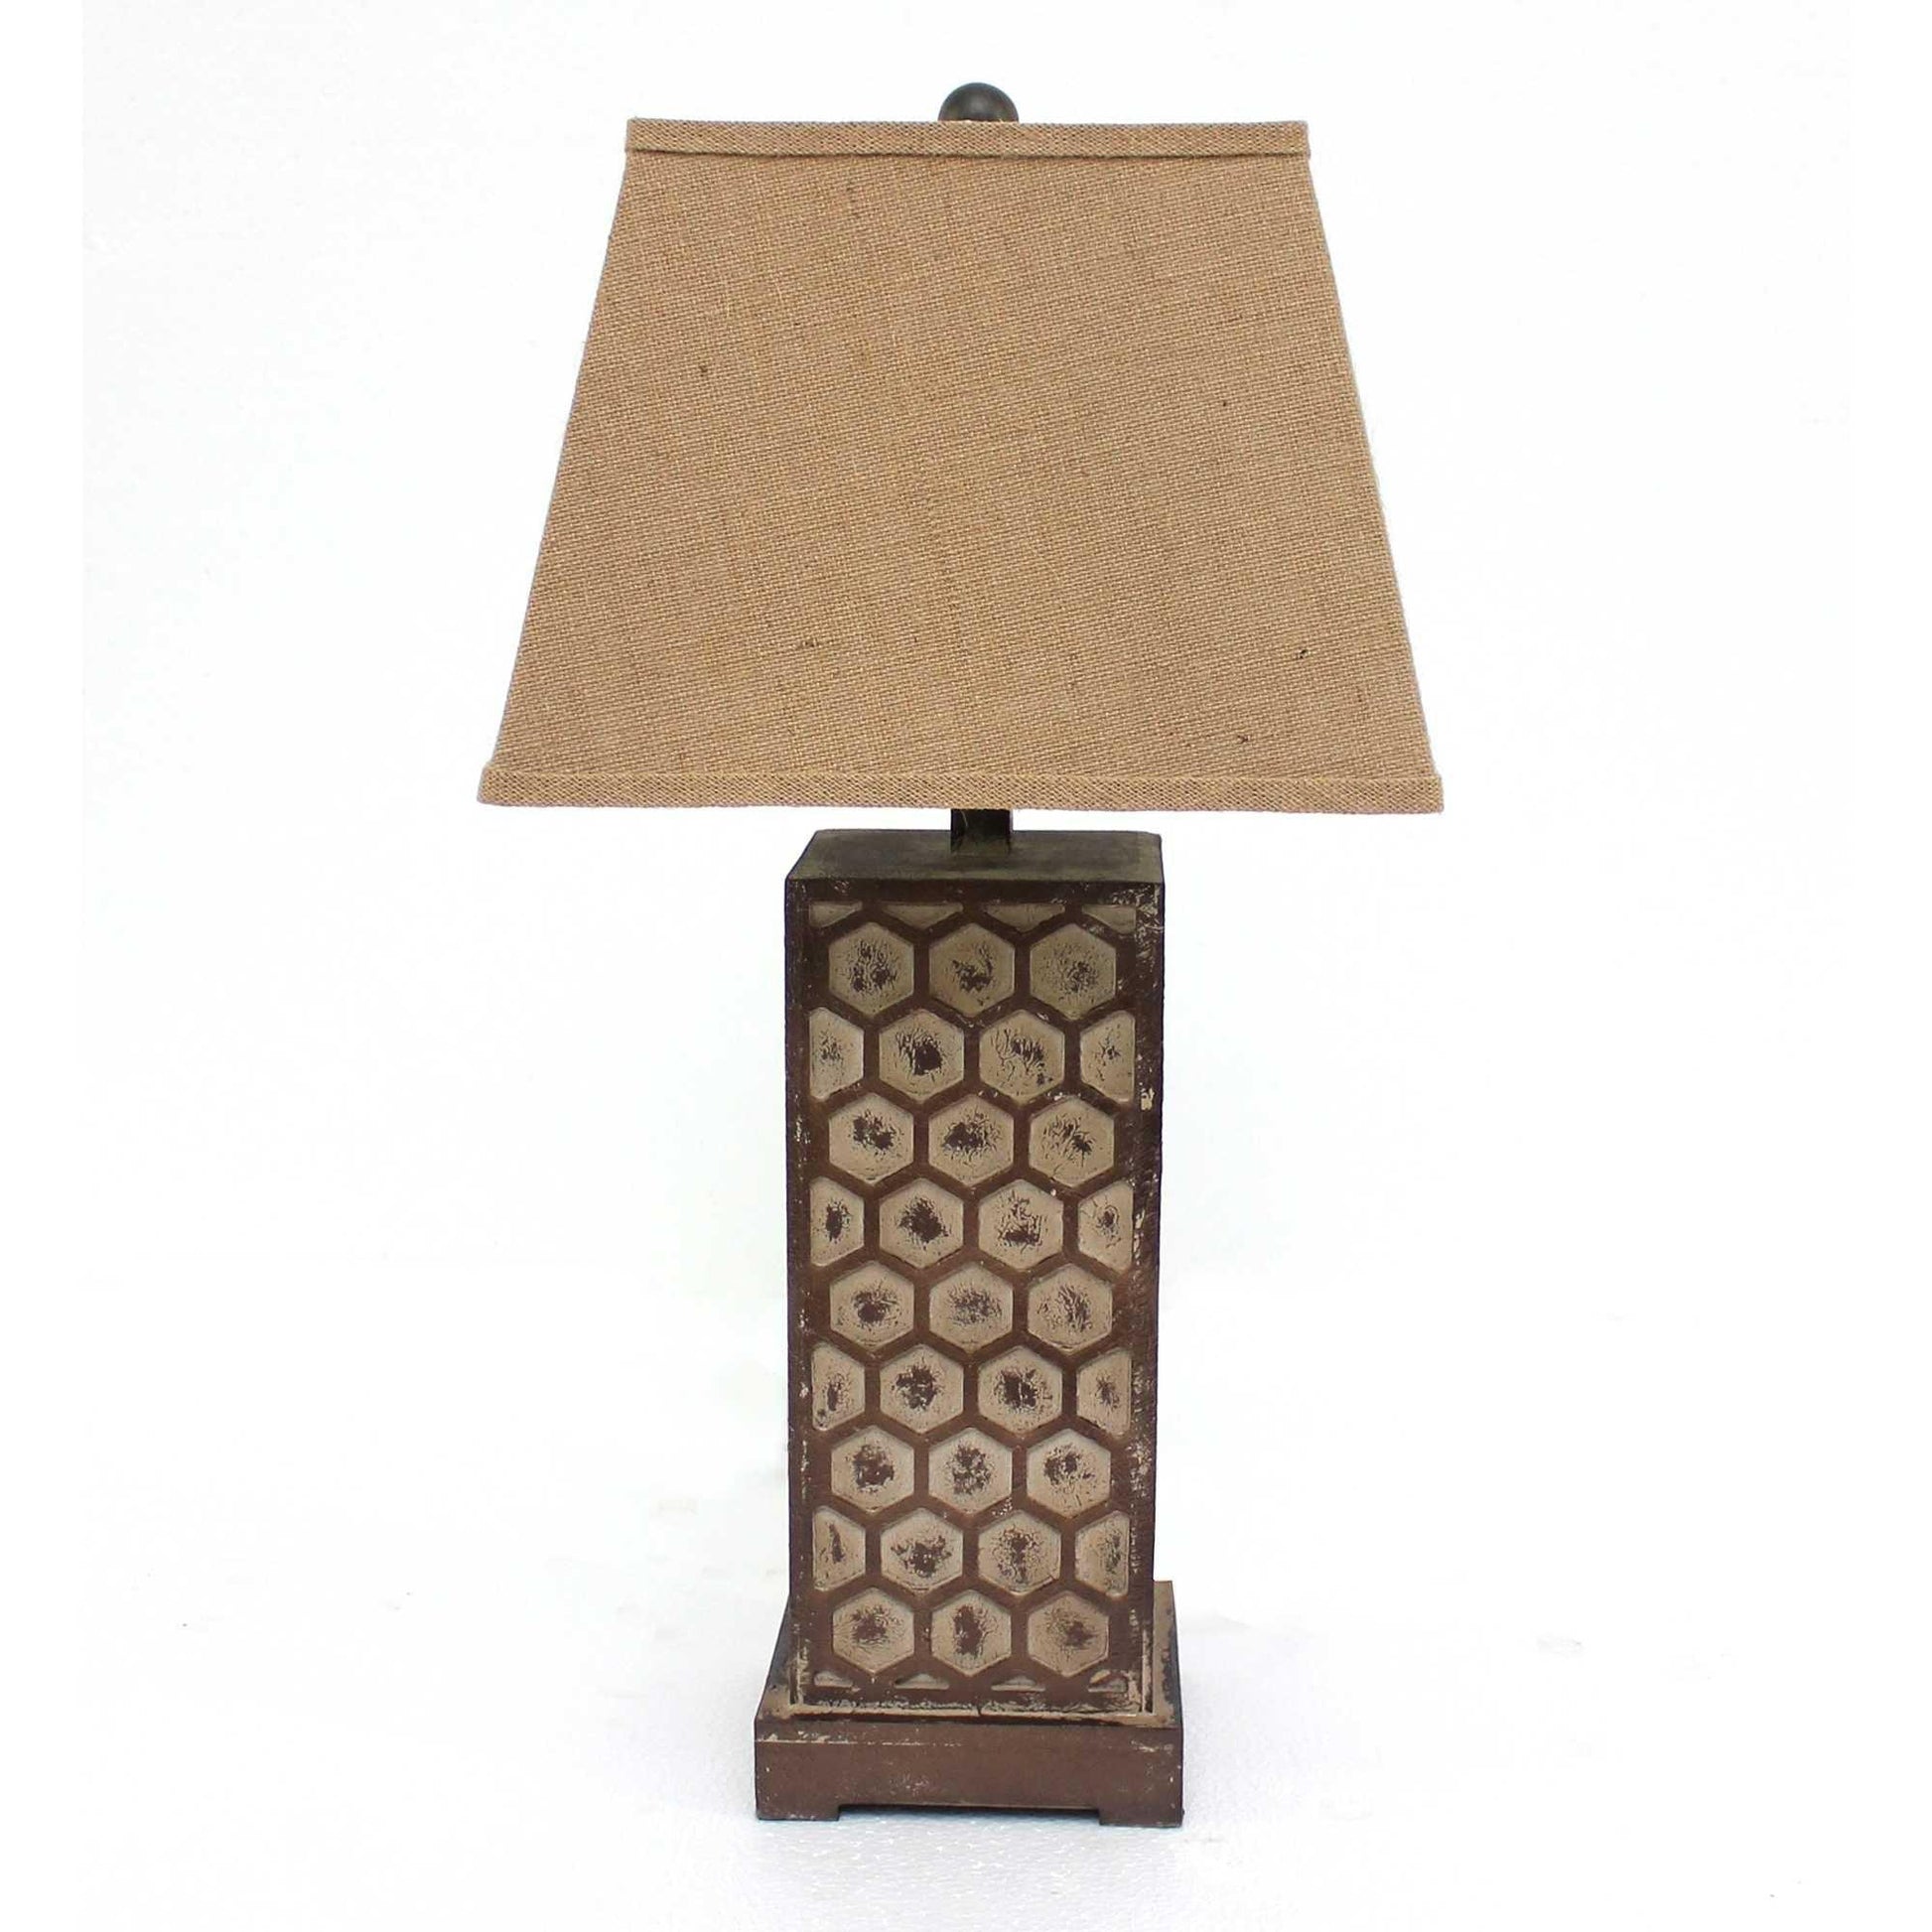 7 x 7 x 28.5 Brown Industrial With Honeycombed Metal Base - Table Lamp - AFS